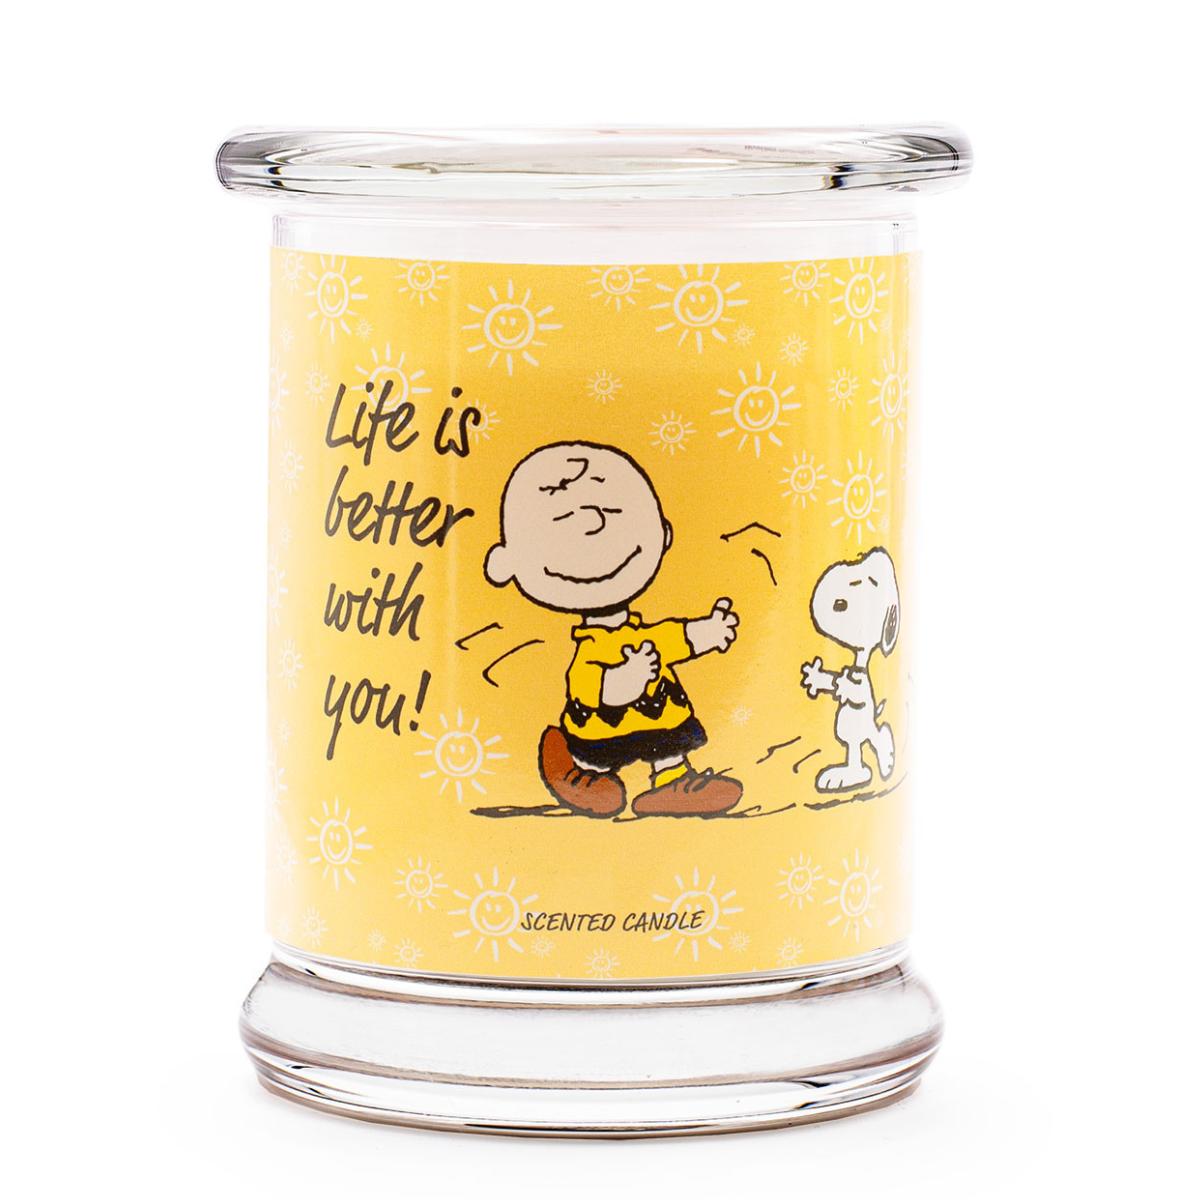 Life is better with you - Duftkerze 250g von Peanuts